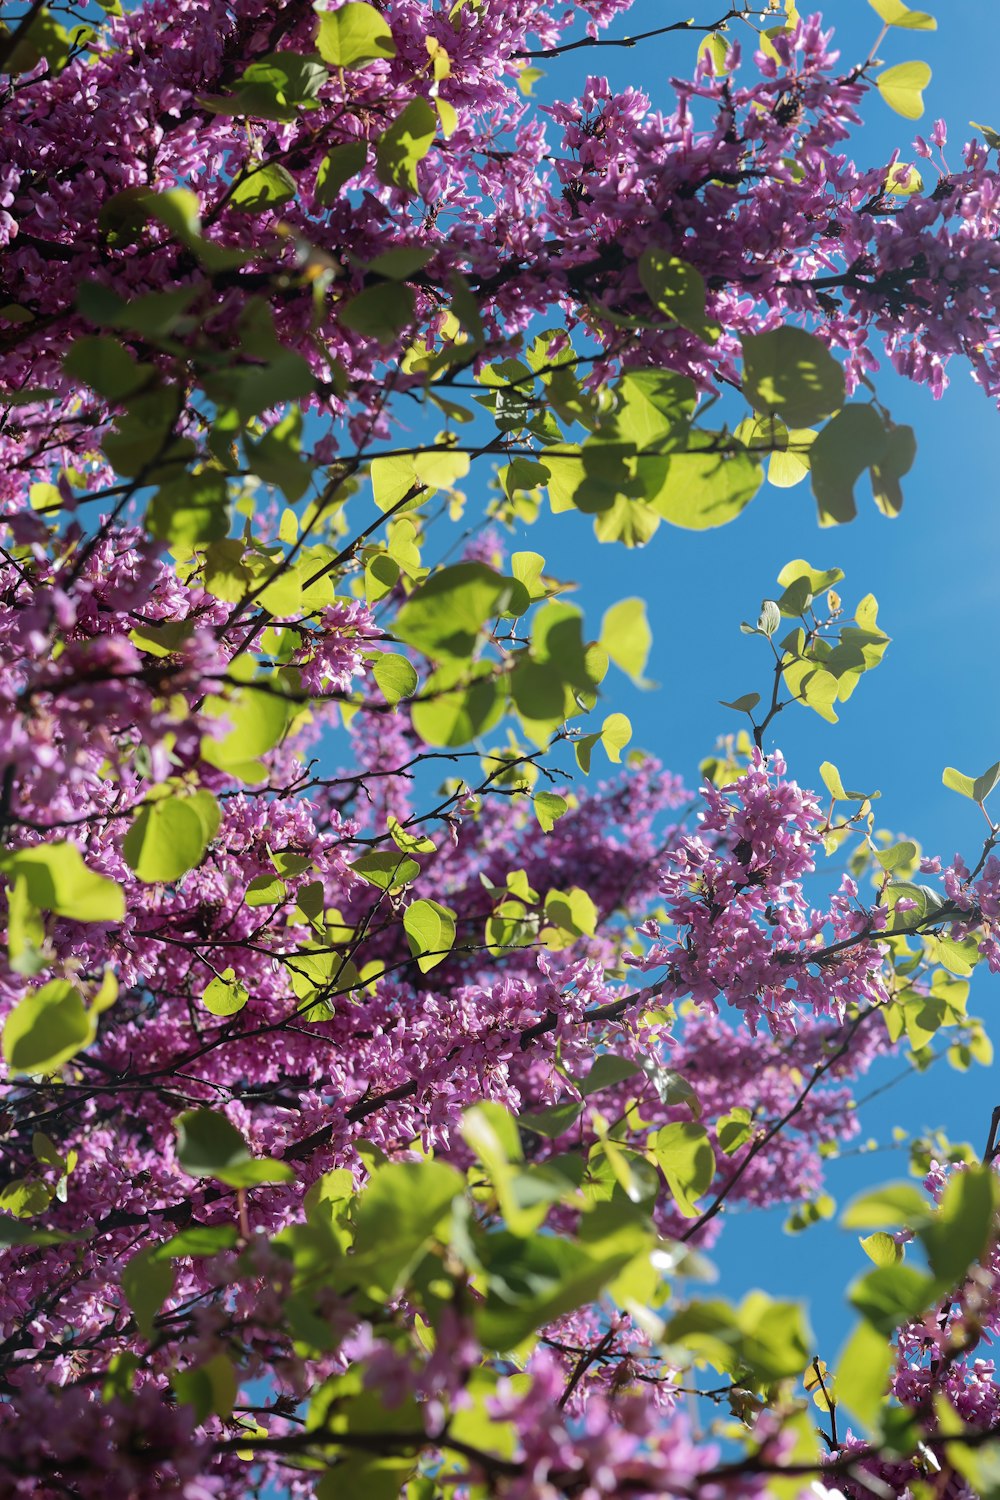 a tree with purple flowers in the foreground and a blue sky in the background